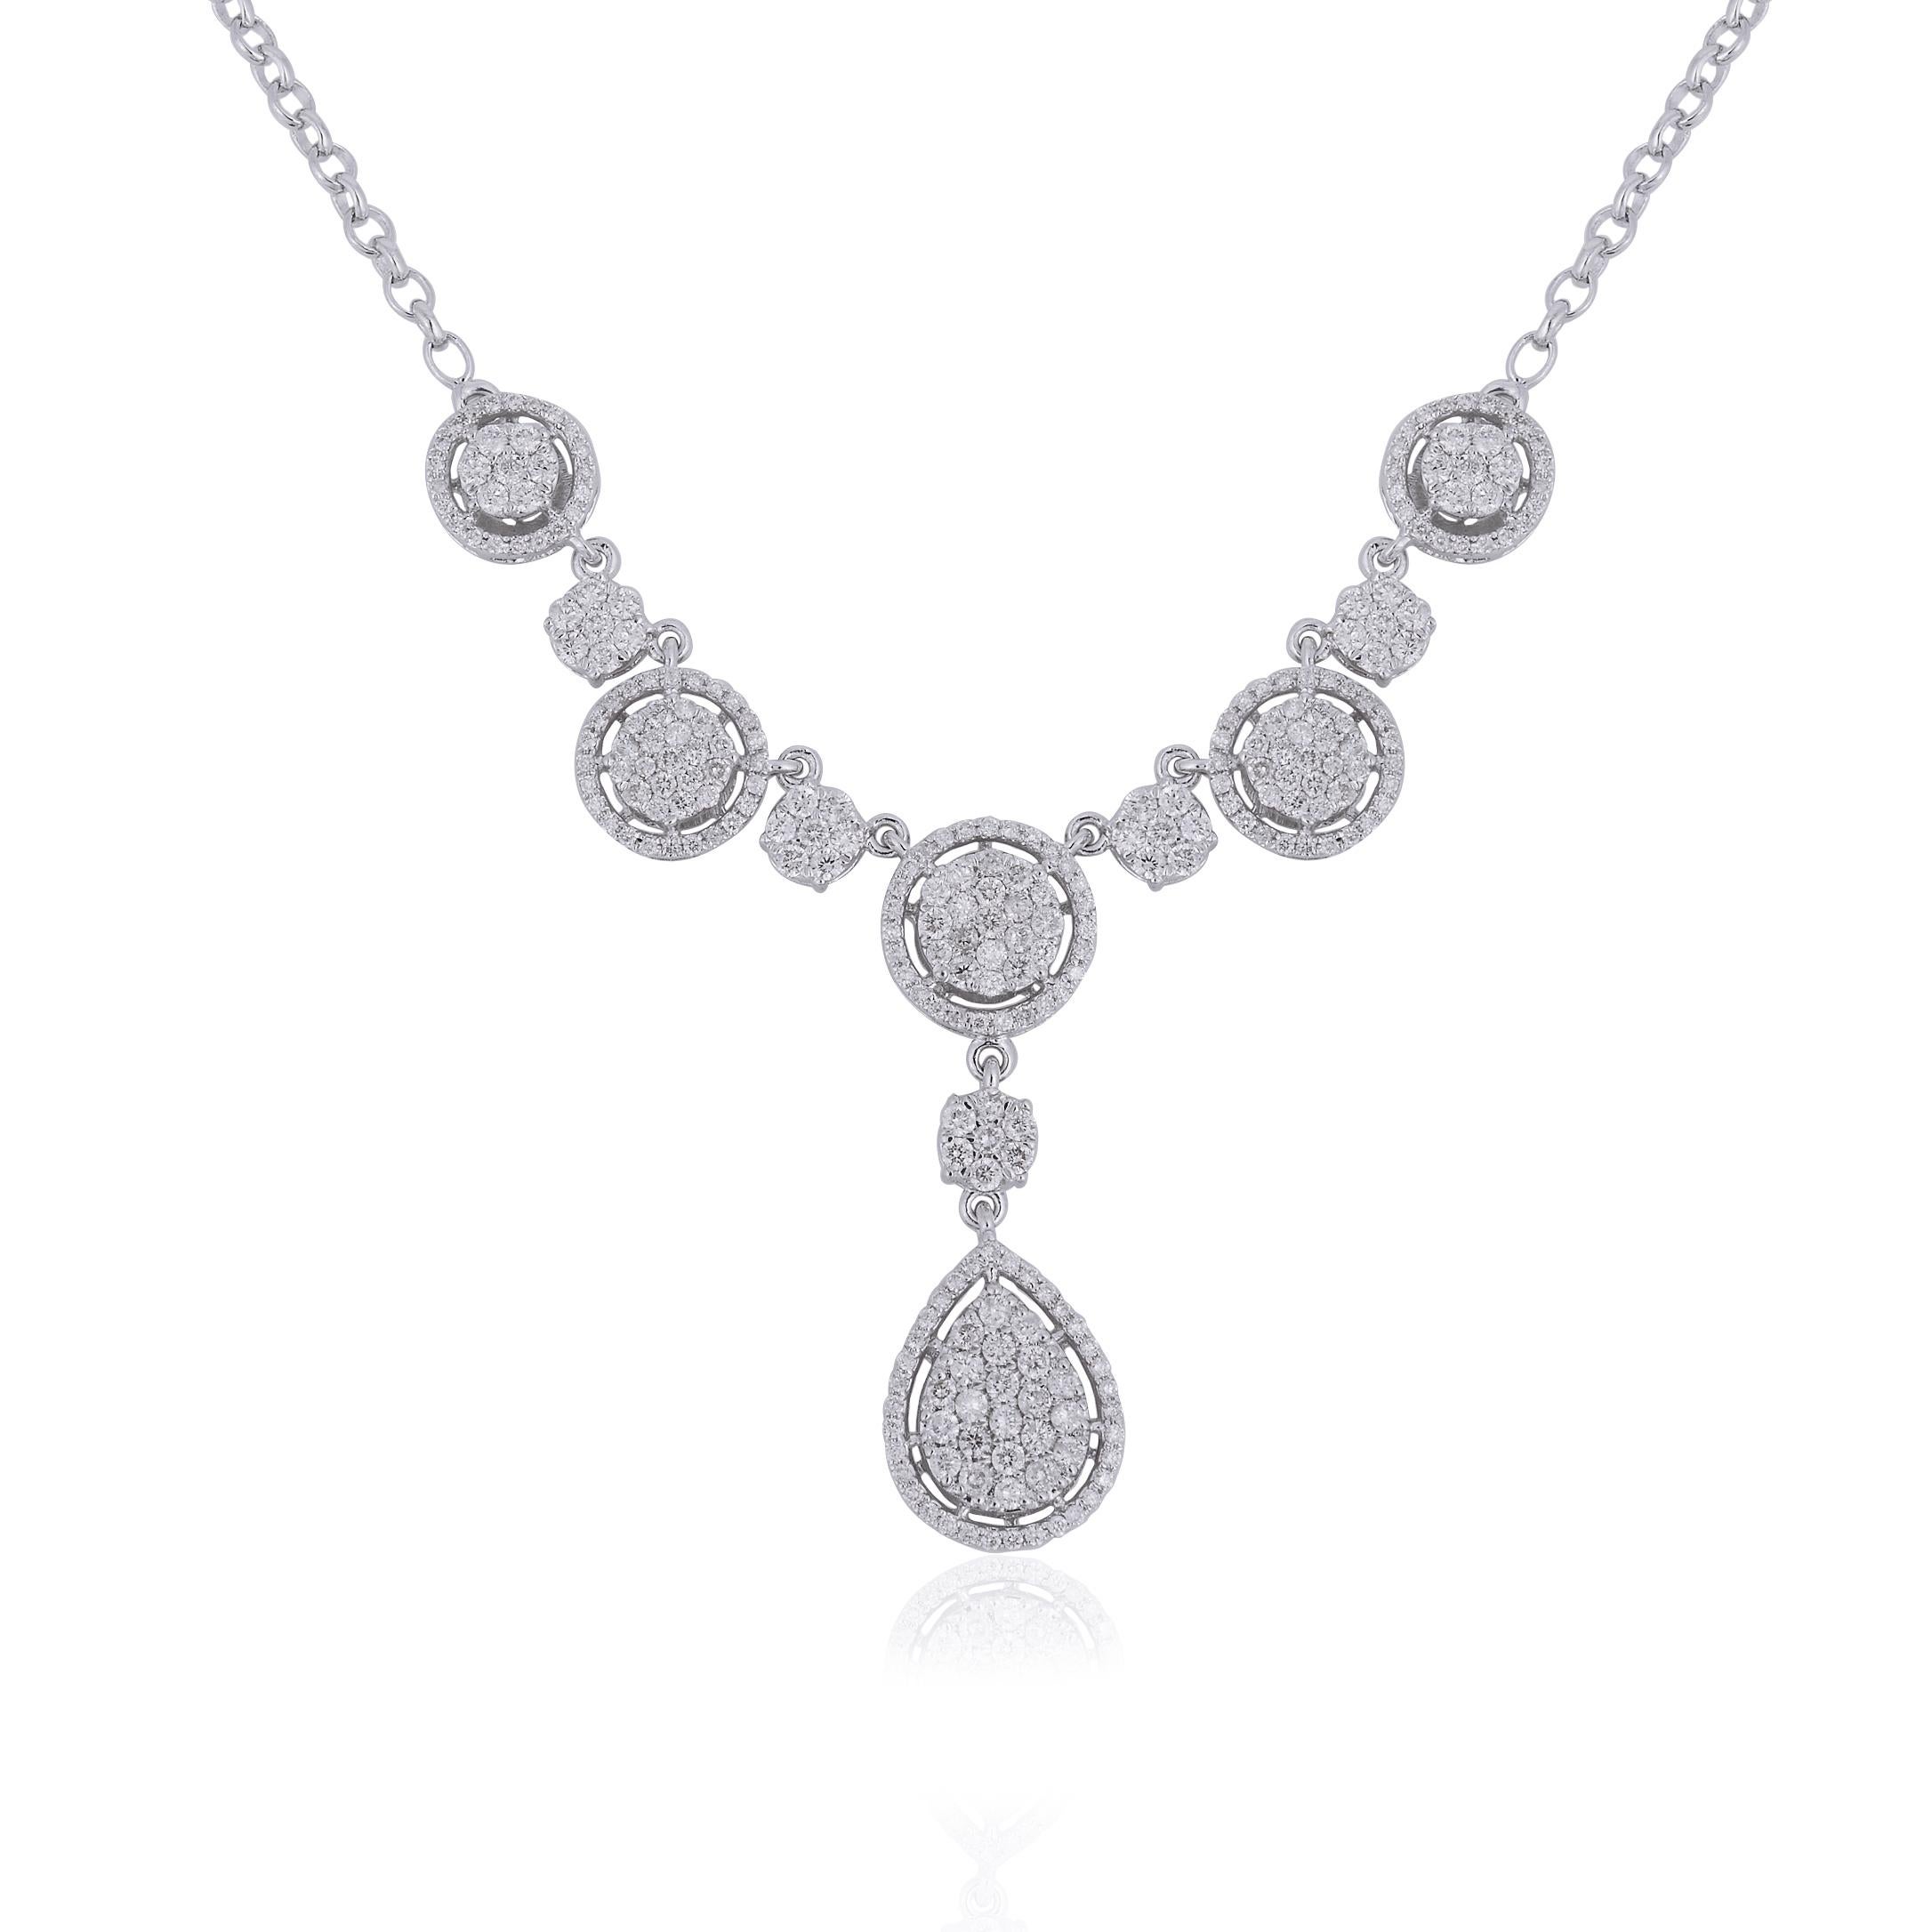 Introducing our exquisite fine jewelry piece: a 2.20-carat diamond pave charm pendant necklace, crafted in 14-karat white gold. This necklace is a true embodiment of timeless beauty and sophistication, designed to make a lasting impression.
Item